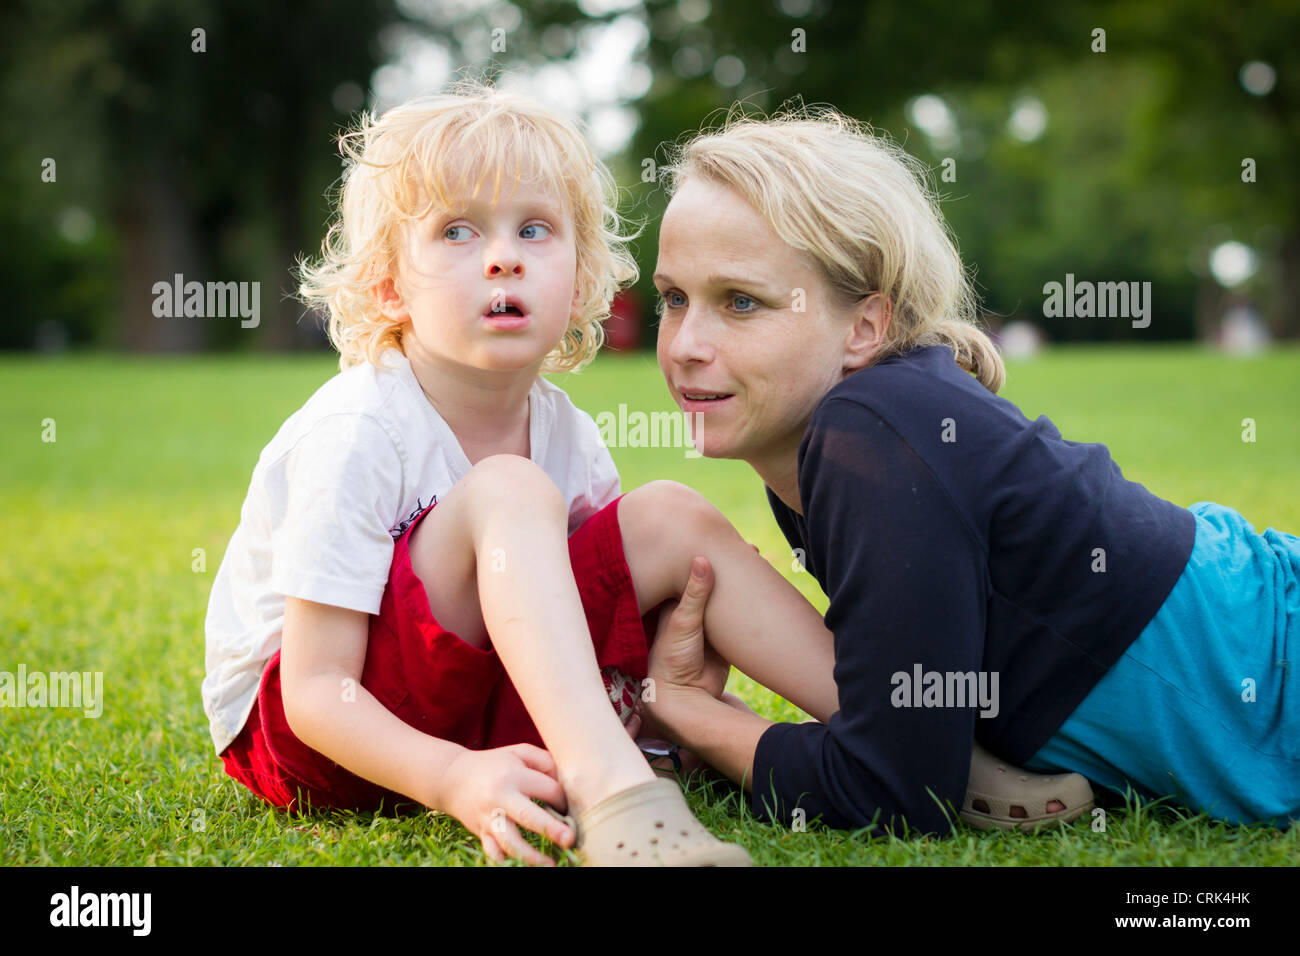 Mother and son sitting in grass Stock Photo